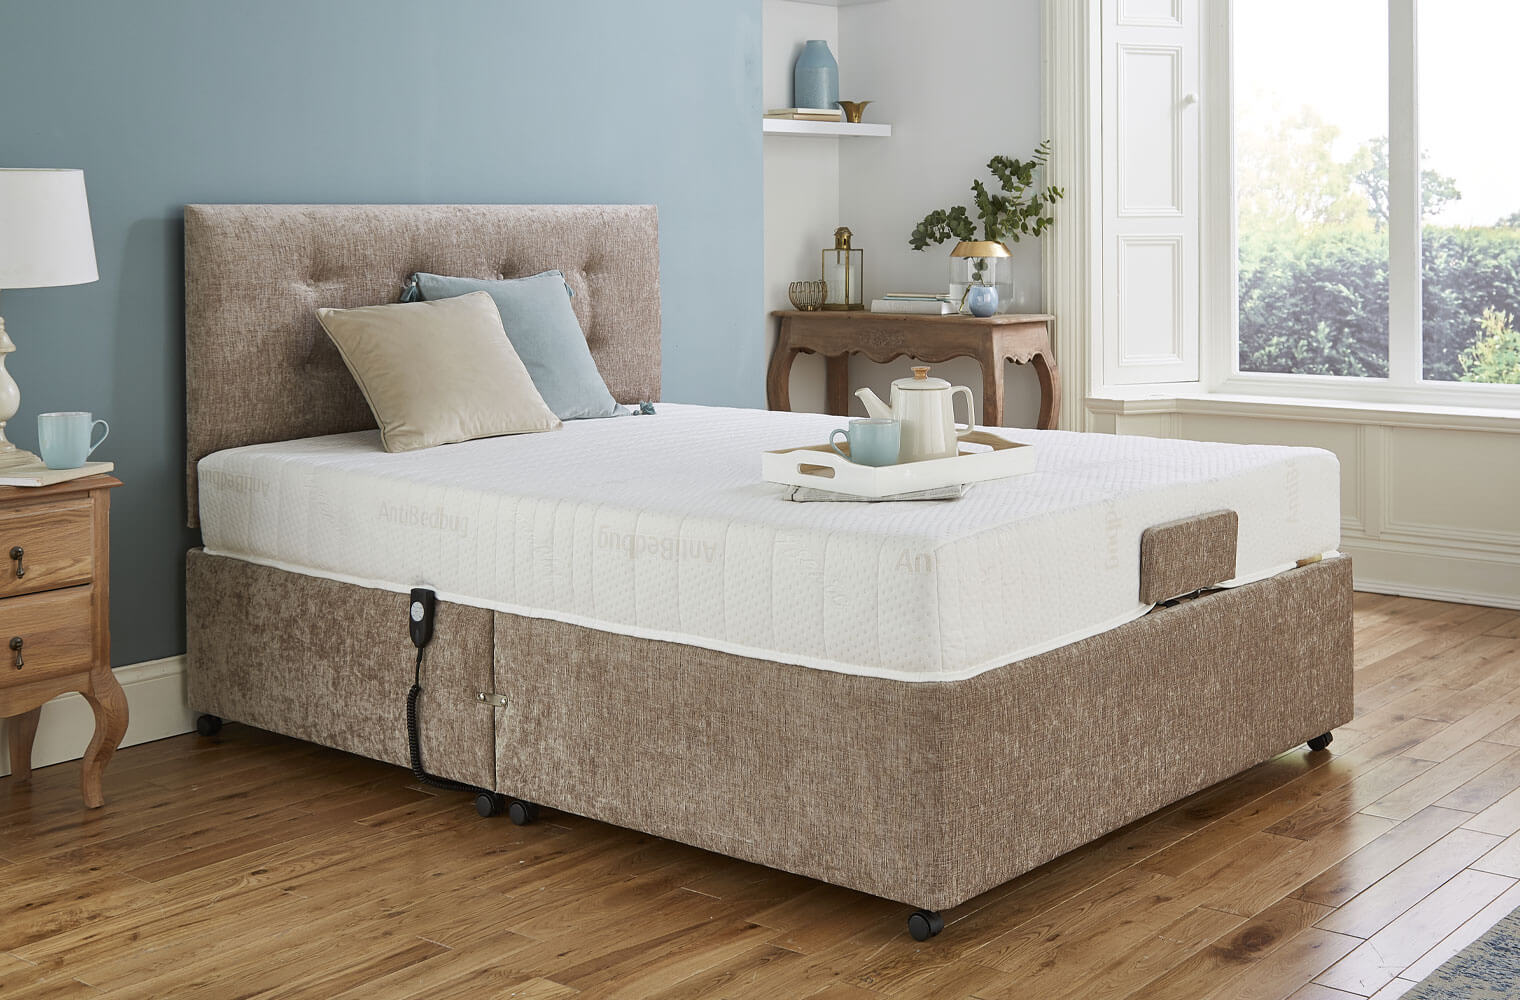 An image of Middletons Chester Classic Fully Adjustable Automatic Bed with Remote Control Si...